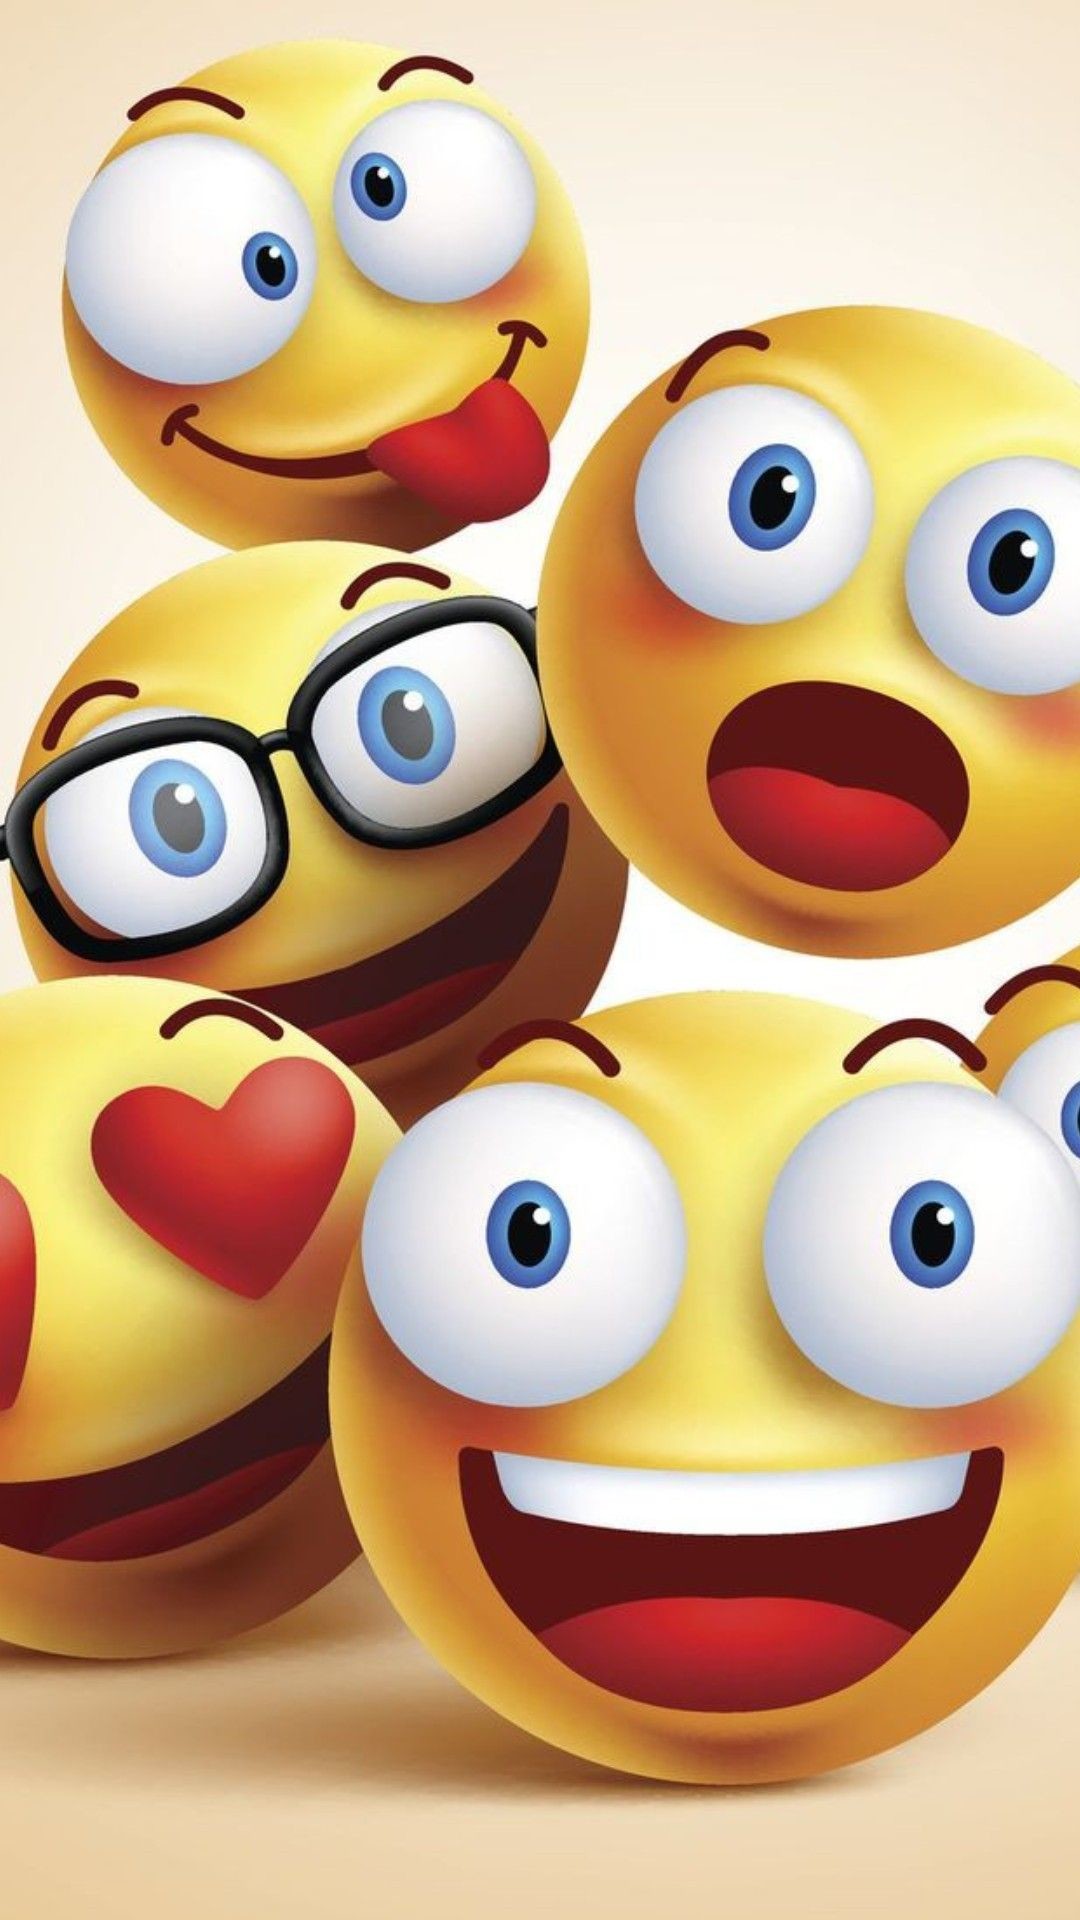 Funny Emoji Wallpapers Top Free Funny Emoji Backgrounds Wallpaperaccess ...